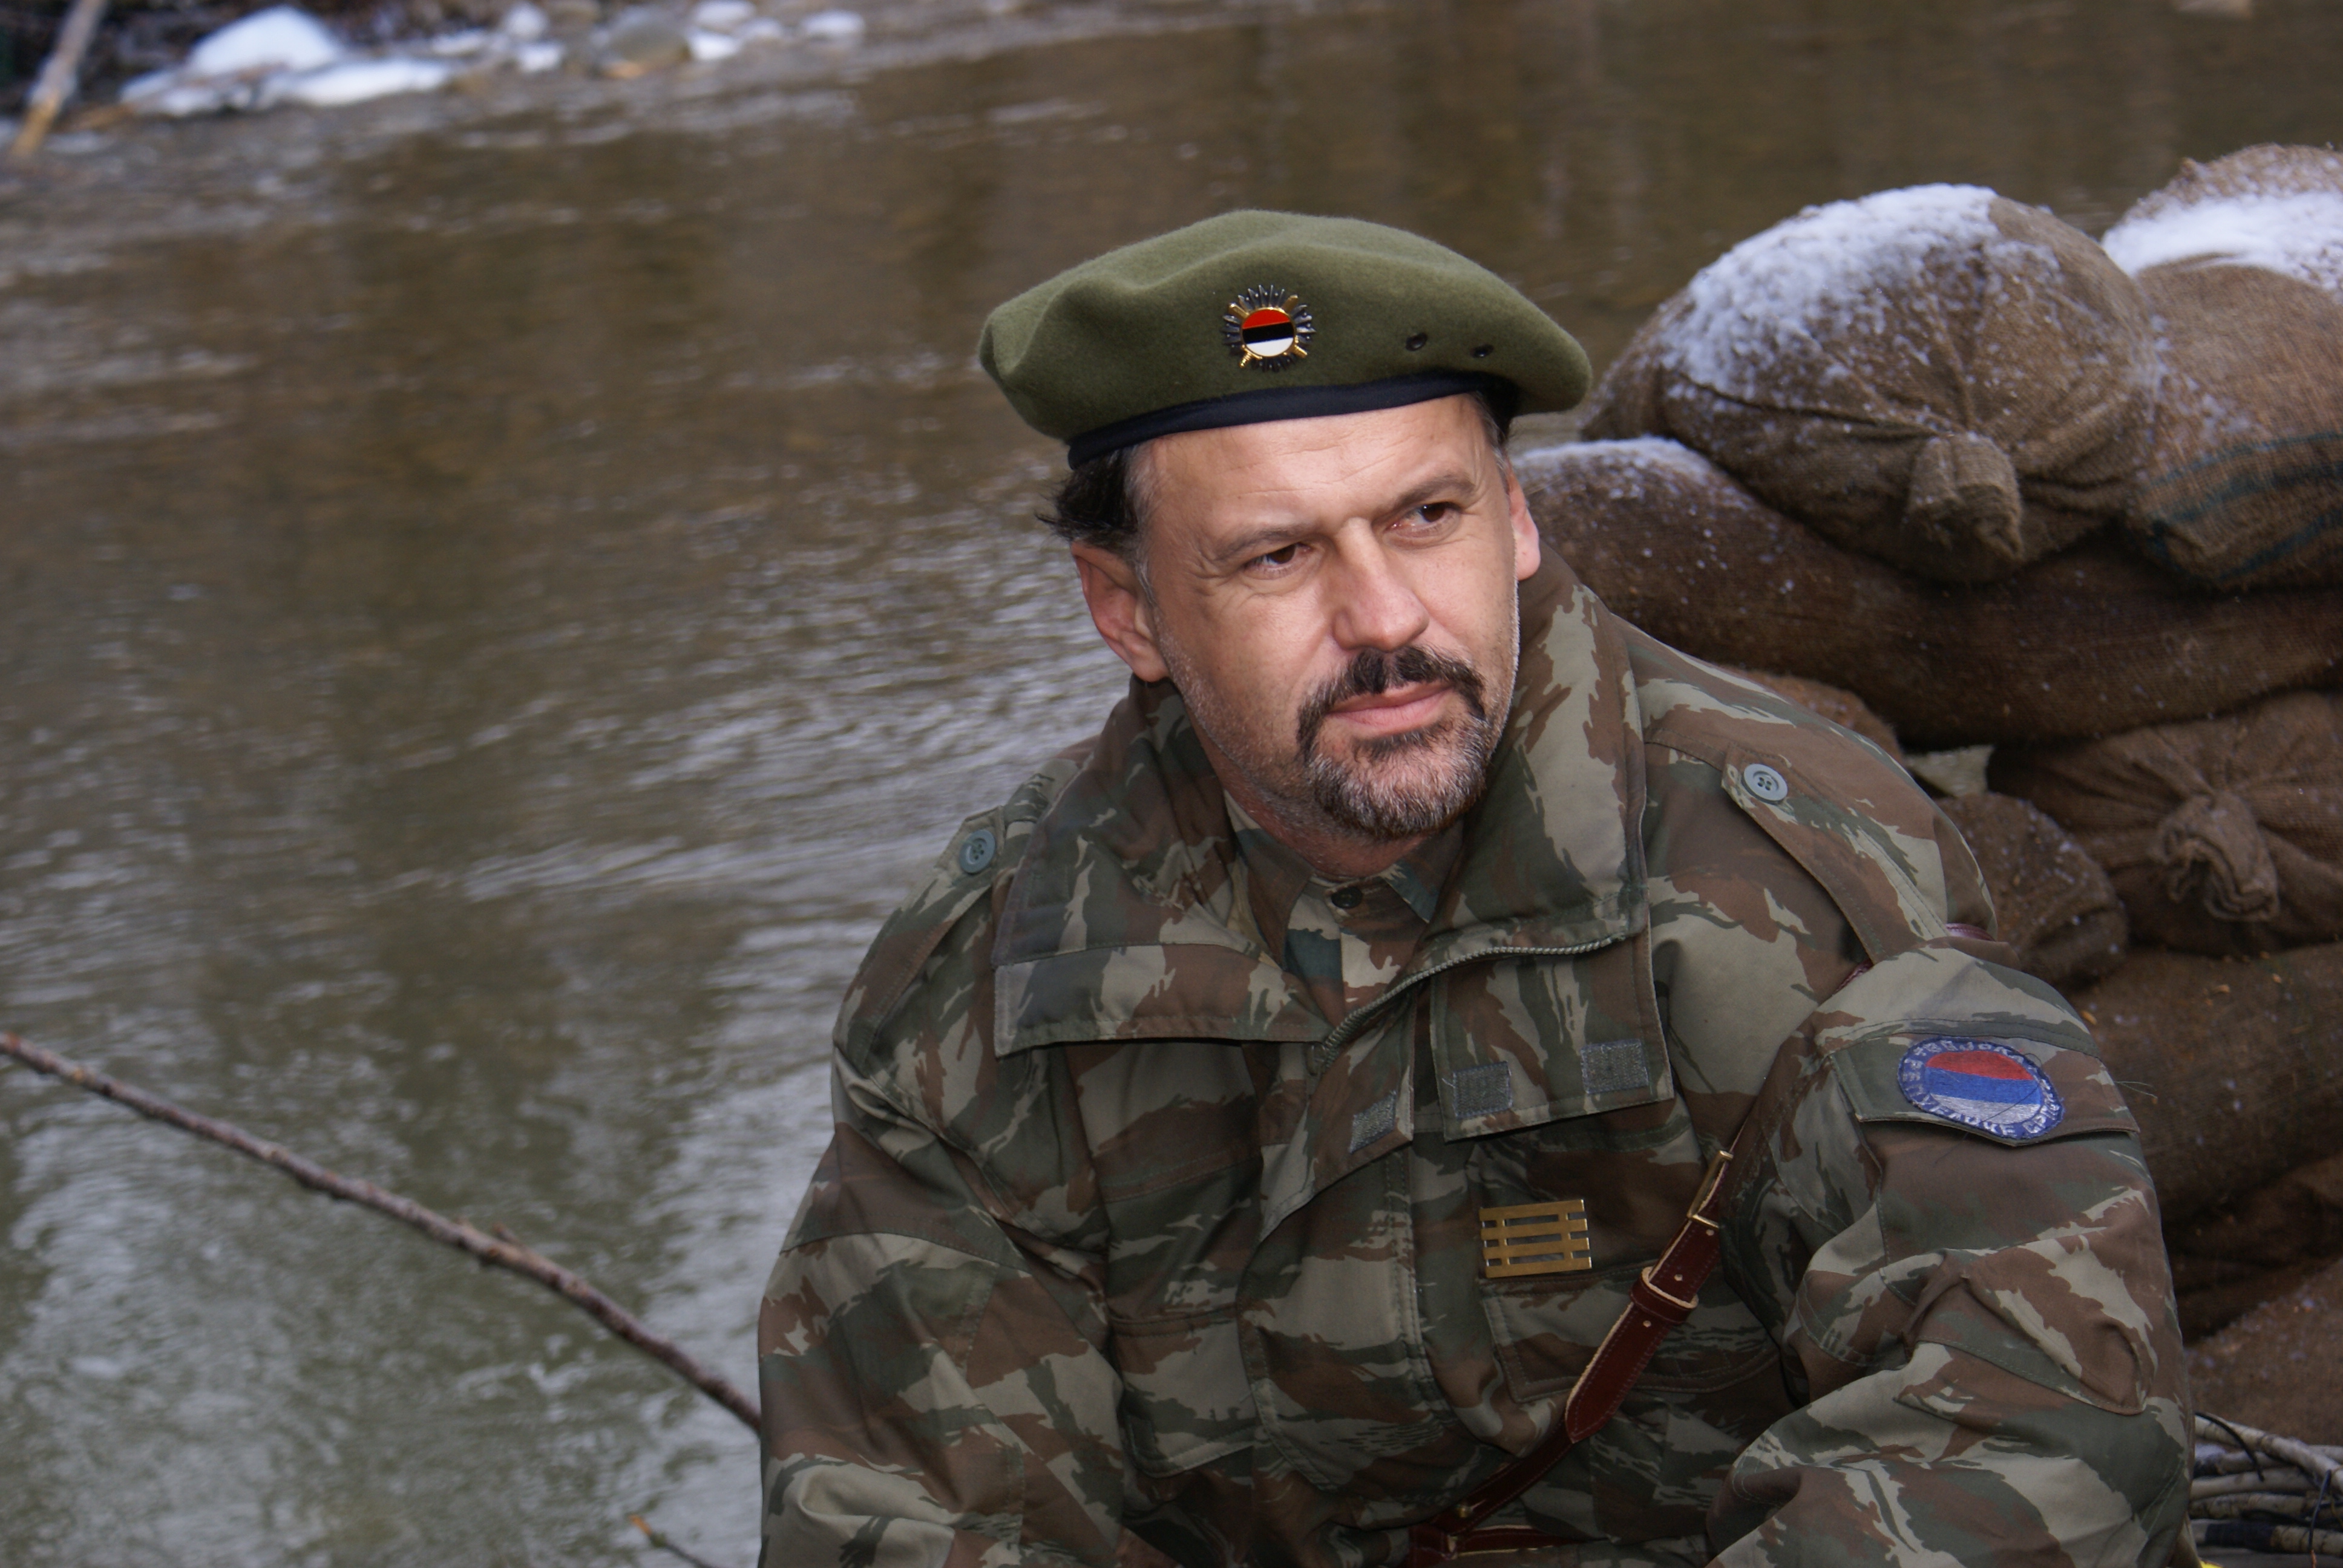 Jack Dimich as 'Captain Stankovic' in The Tour (Turneja)...Directed by Goran Markovic